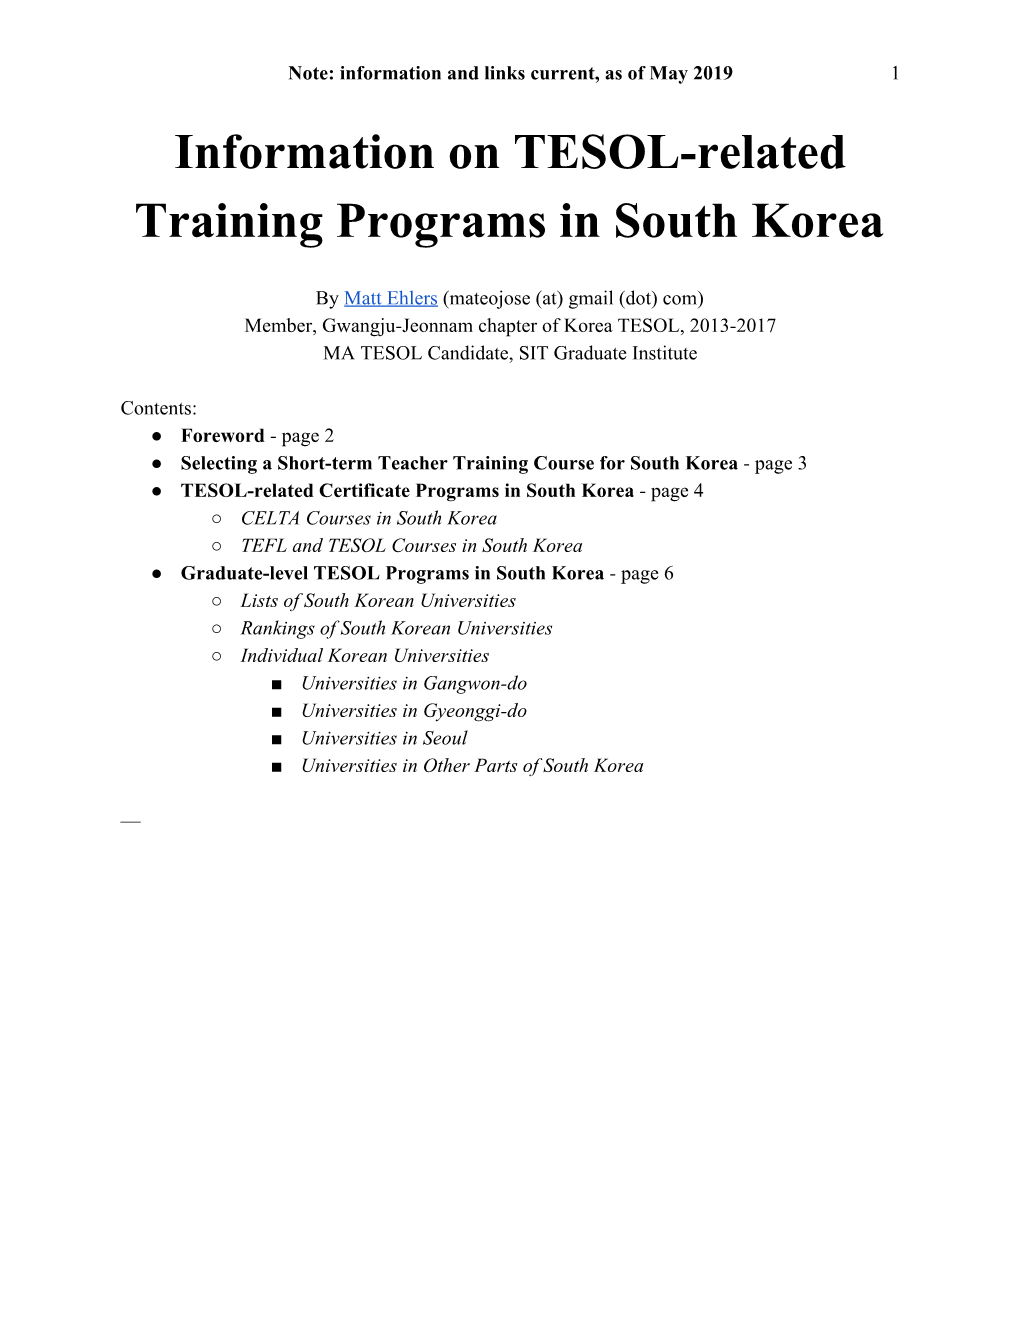 Information on TESOL-Related Training Programs in South Korea